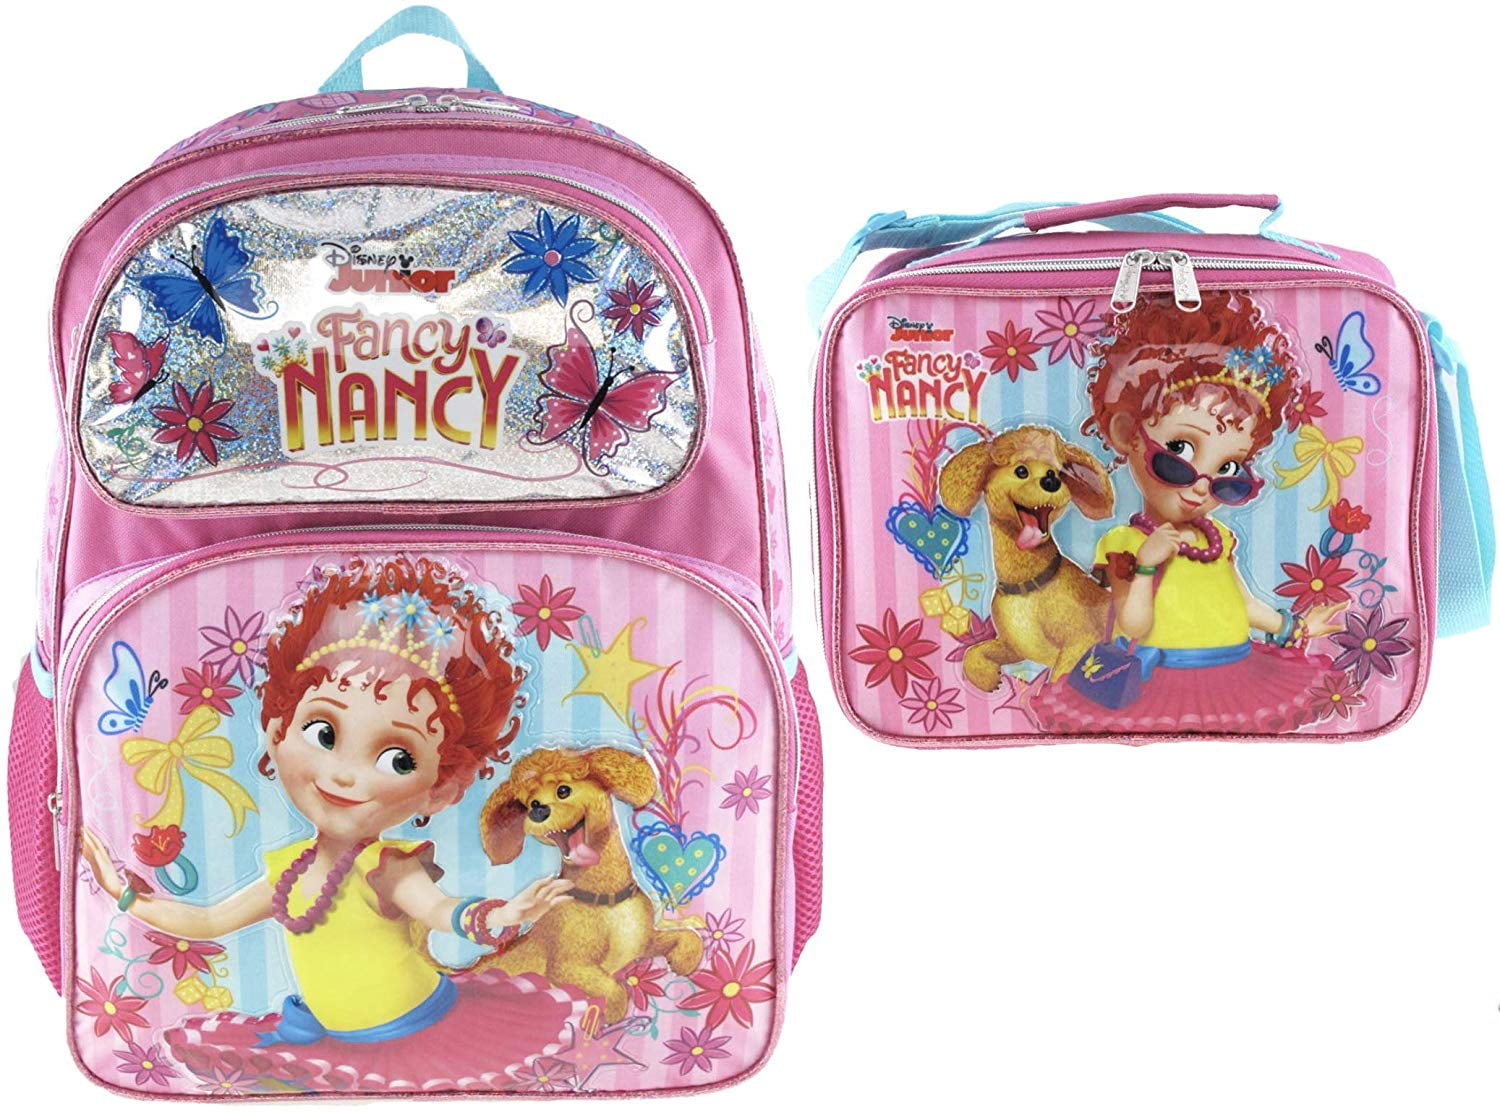 Fancy Nancy 16 inch Backpack and Matching Insulated Lunch Box Durable Quality! 